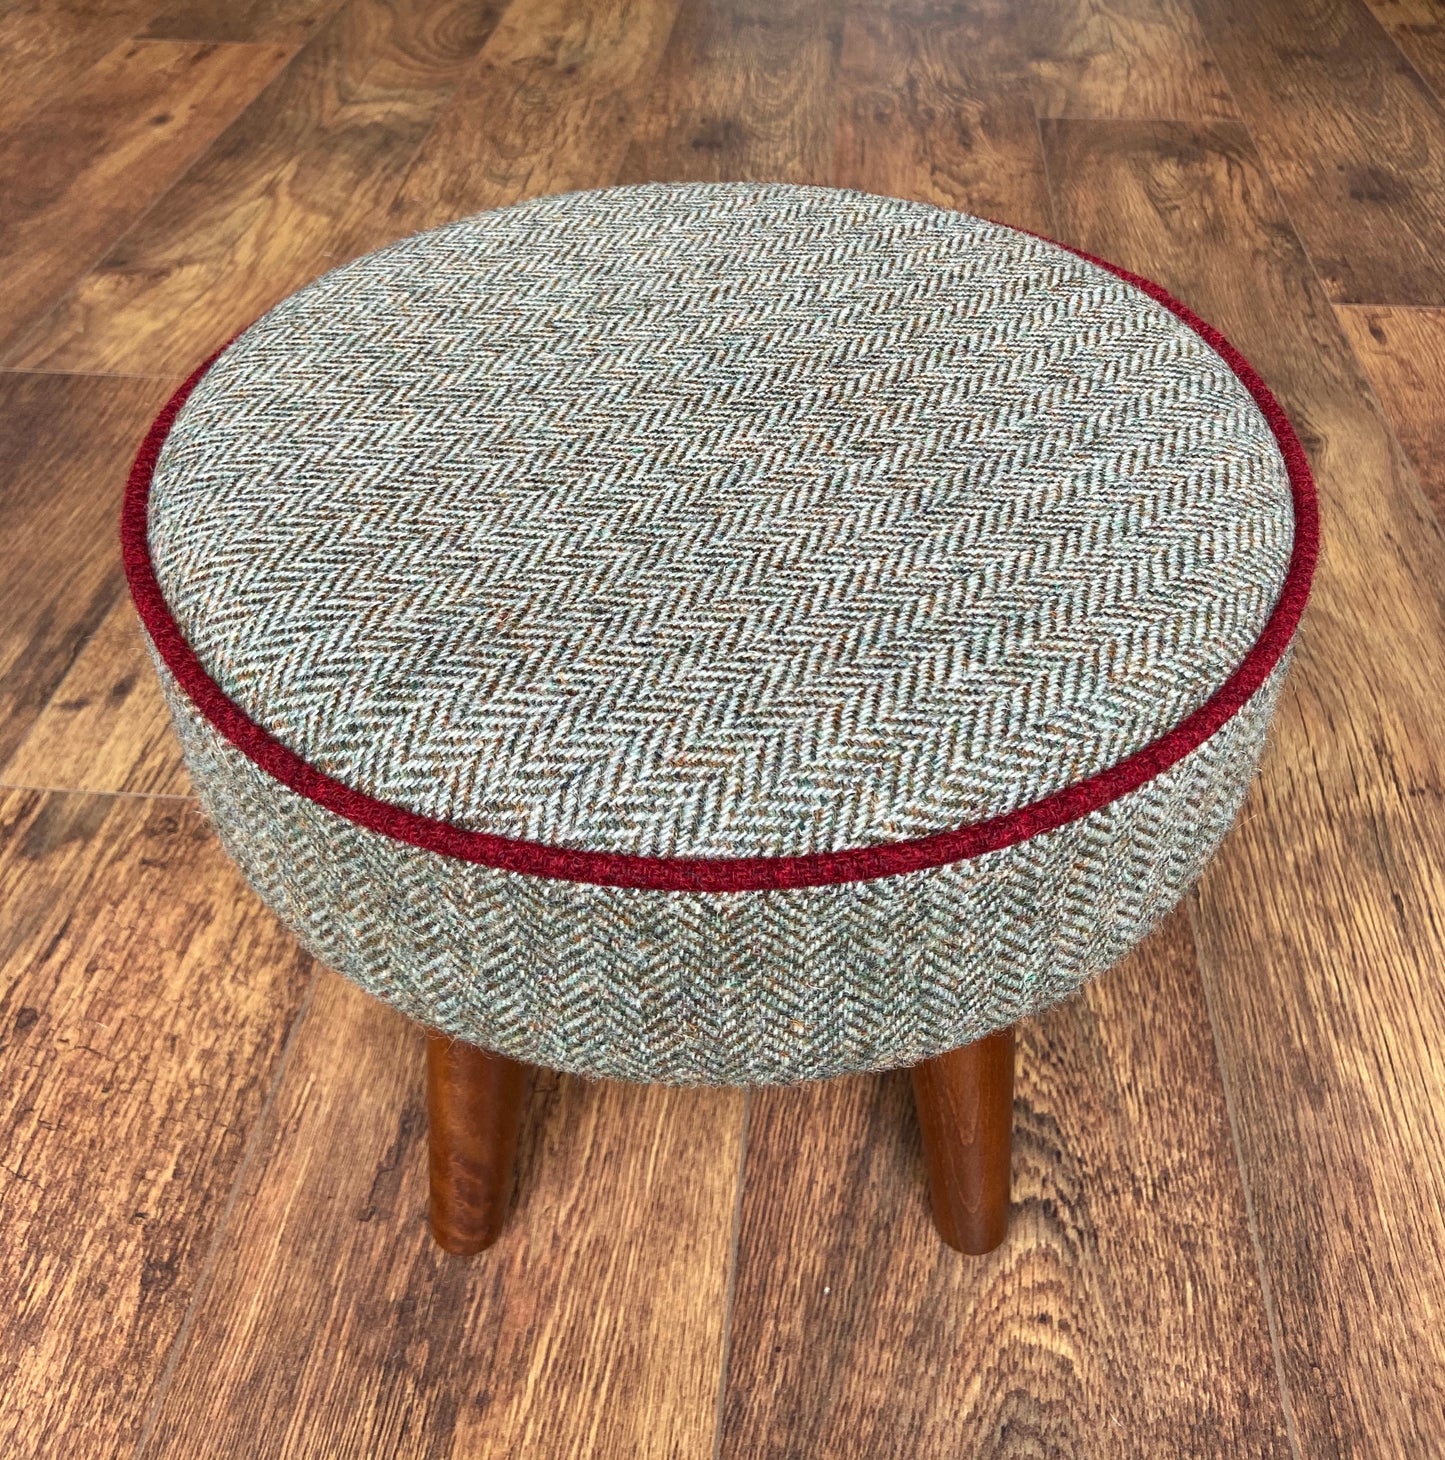 Brown Harris Tweed Footstool with Red Piping and Dark Varnished Wooden Legs